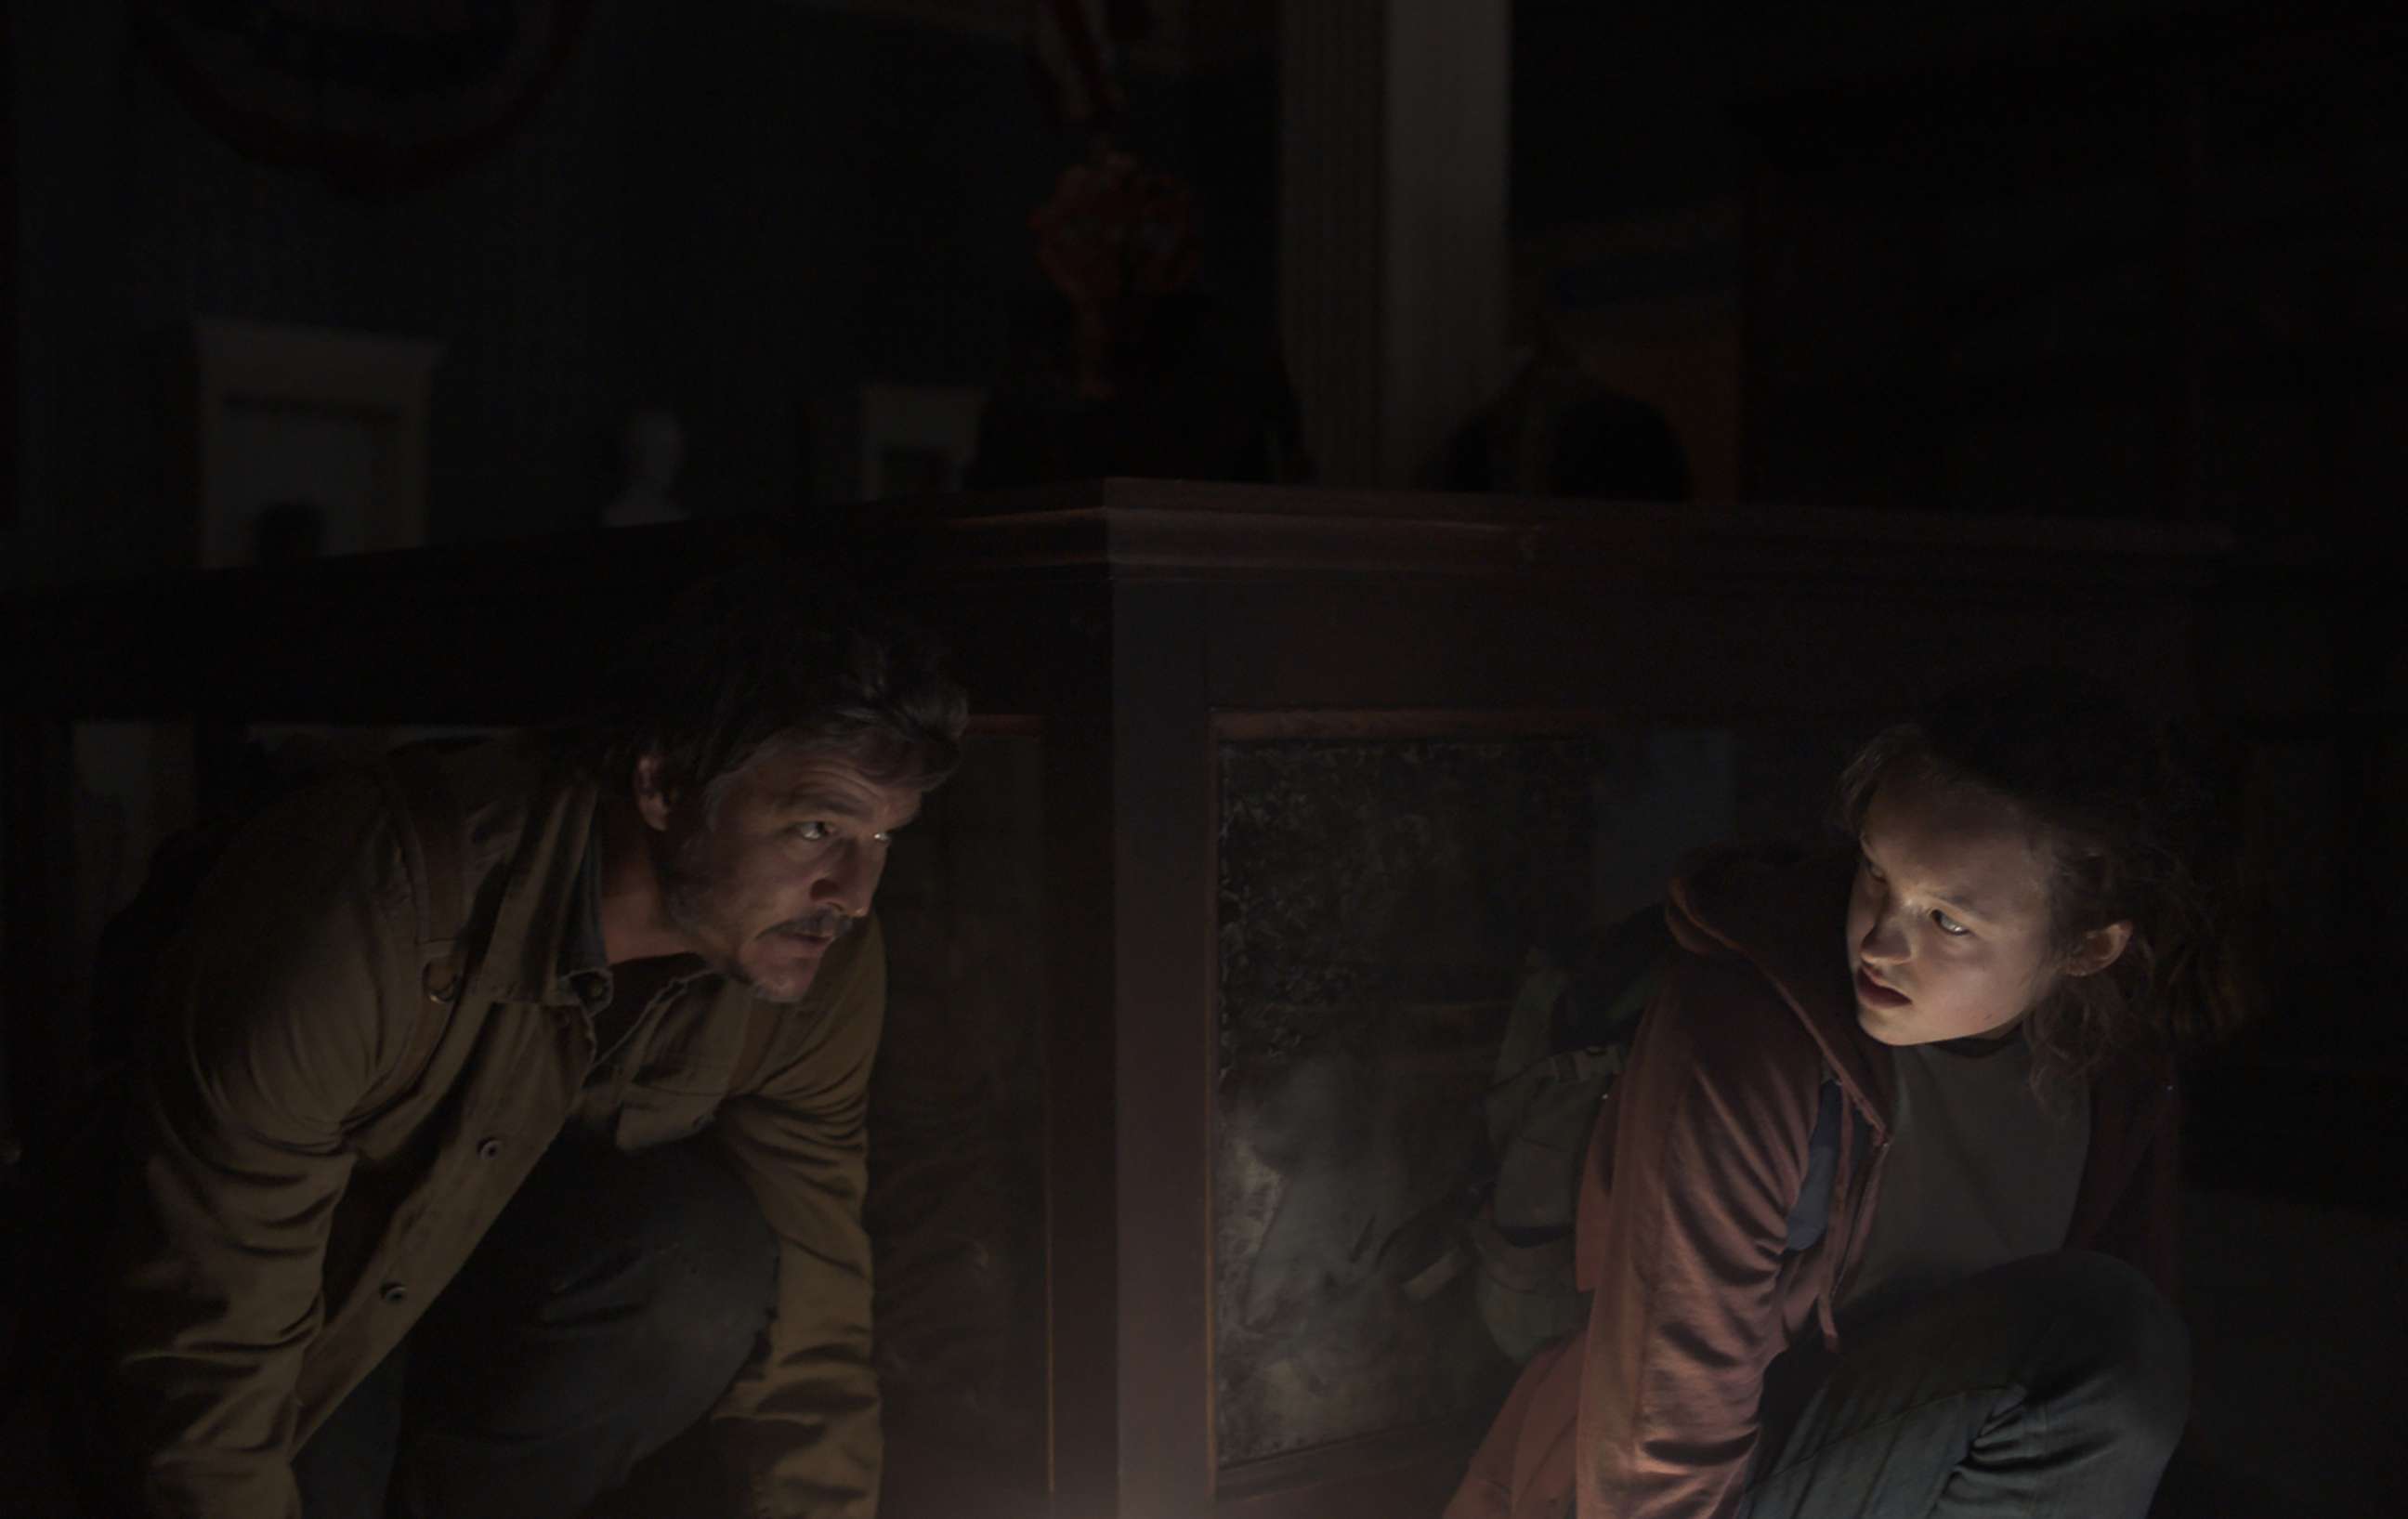 PHOTO: Pedro Pascal as Joel and Bella Ramsey as Ellie in a still from HBO's "The Last of Us."